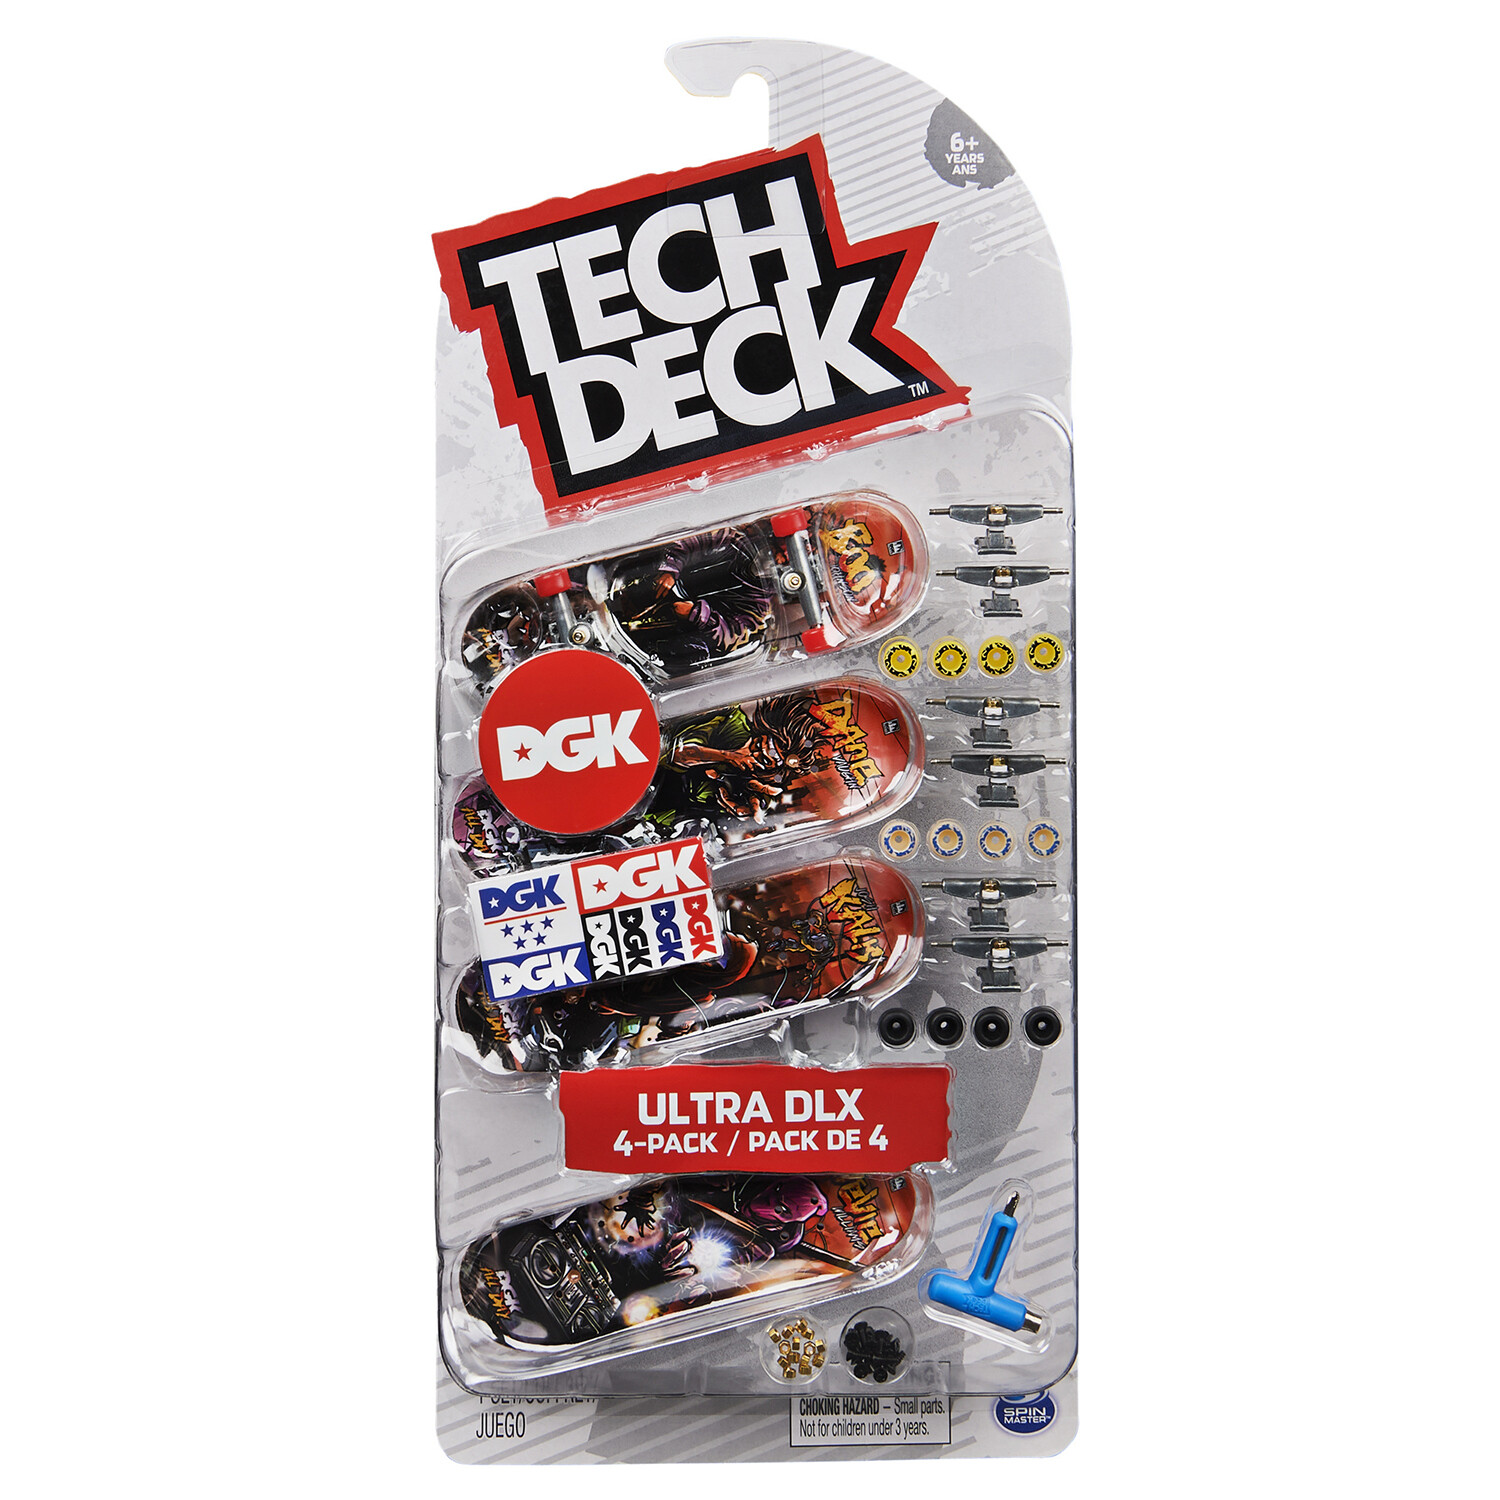 Single Tech Deck Ultra DLX Skateboards Figures 4 Pack in Assorted styles Image 3